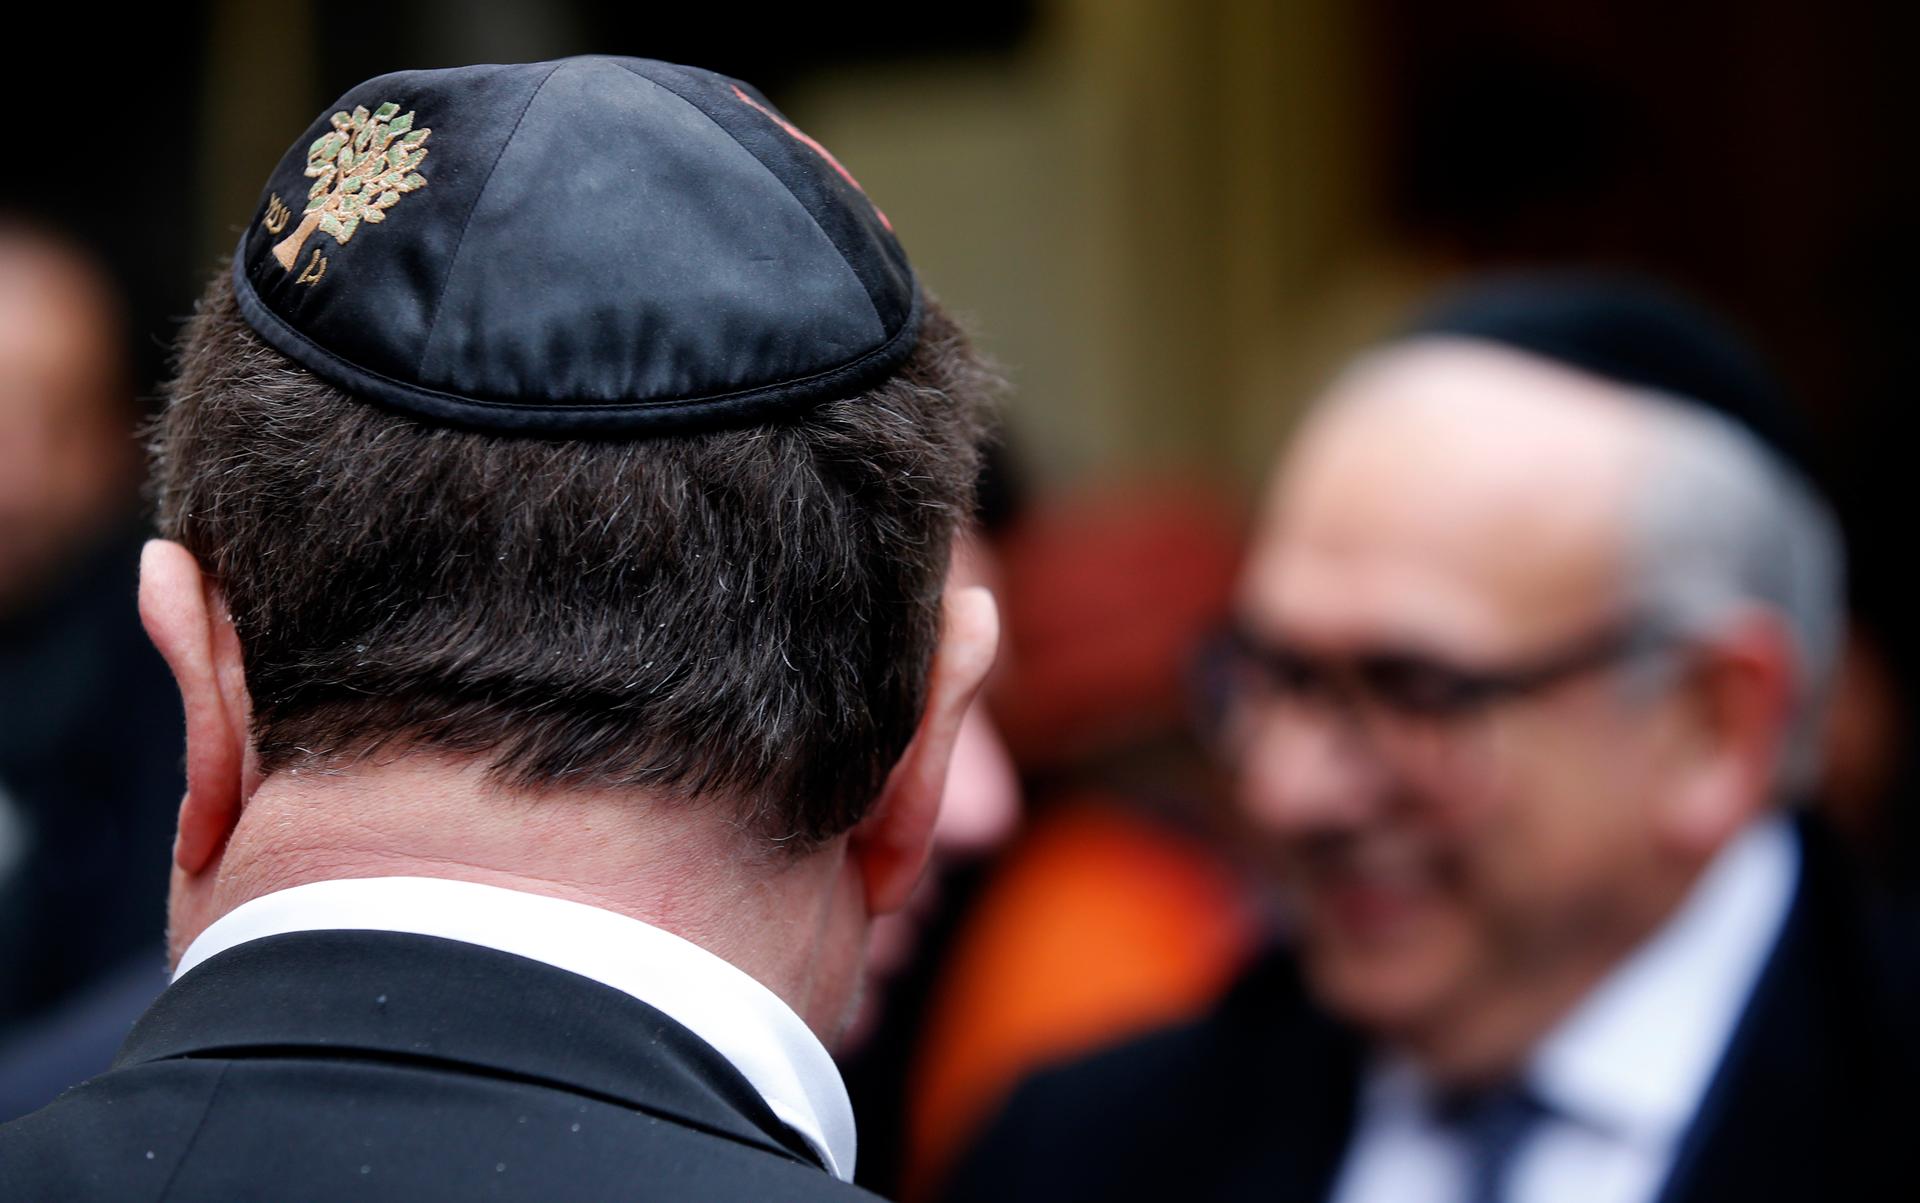 The kippa or yarmulke is traditionally worn by some Jewish men